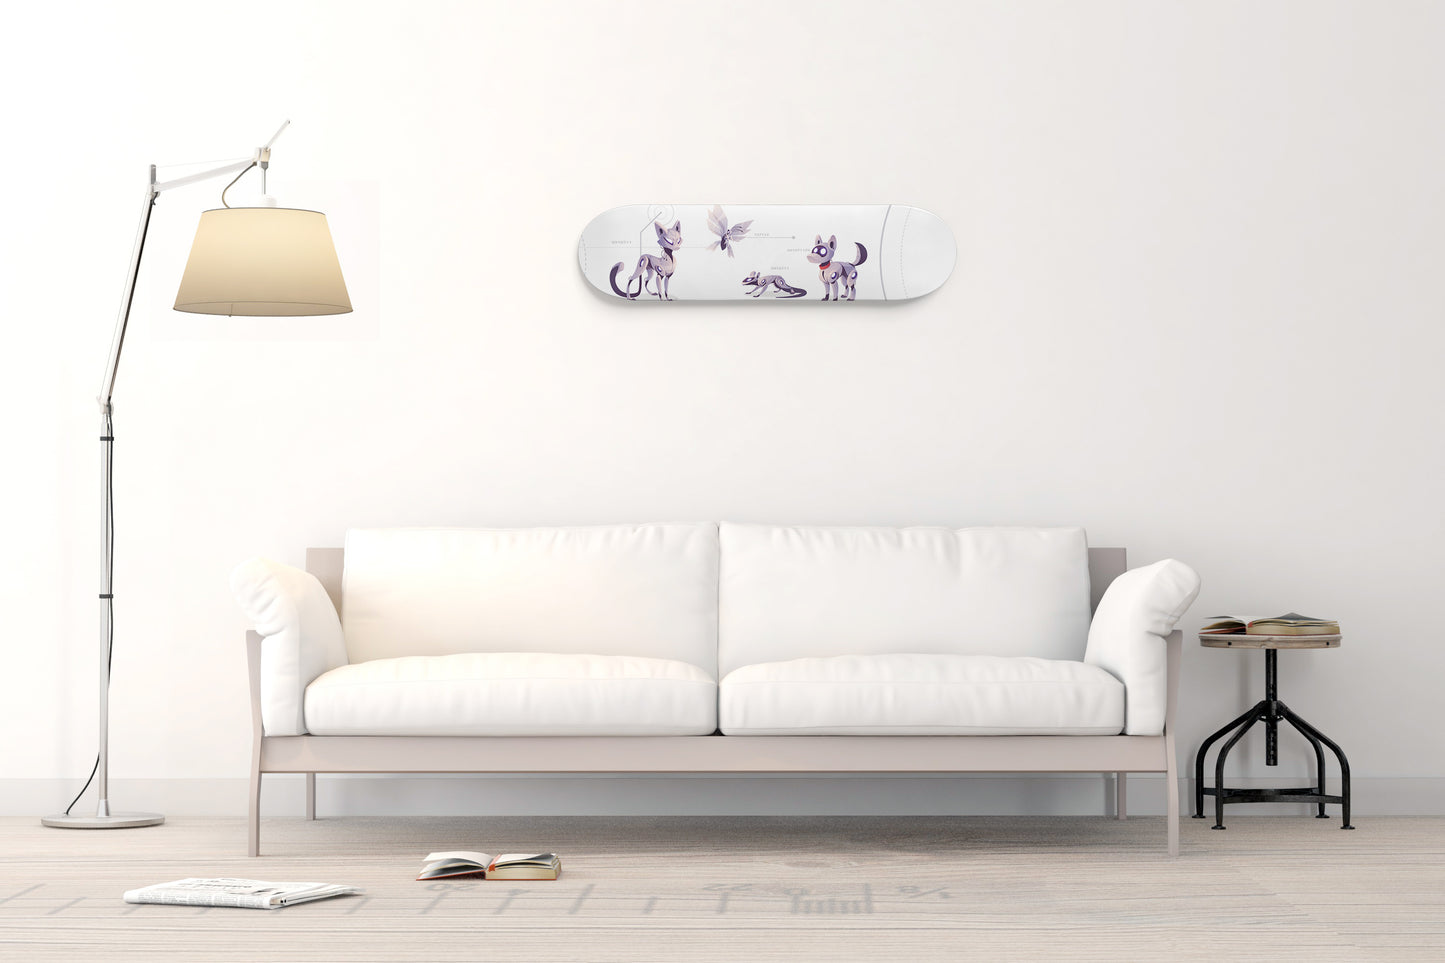 Mechanical Animals inspired - 'Cat, dog, rat and insects wasp robots' - Skateboard Wall Art